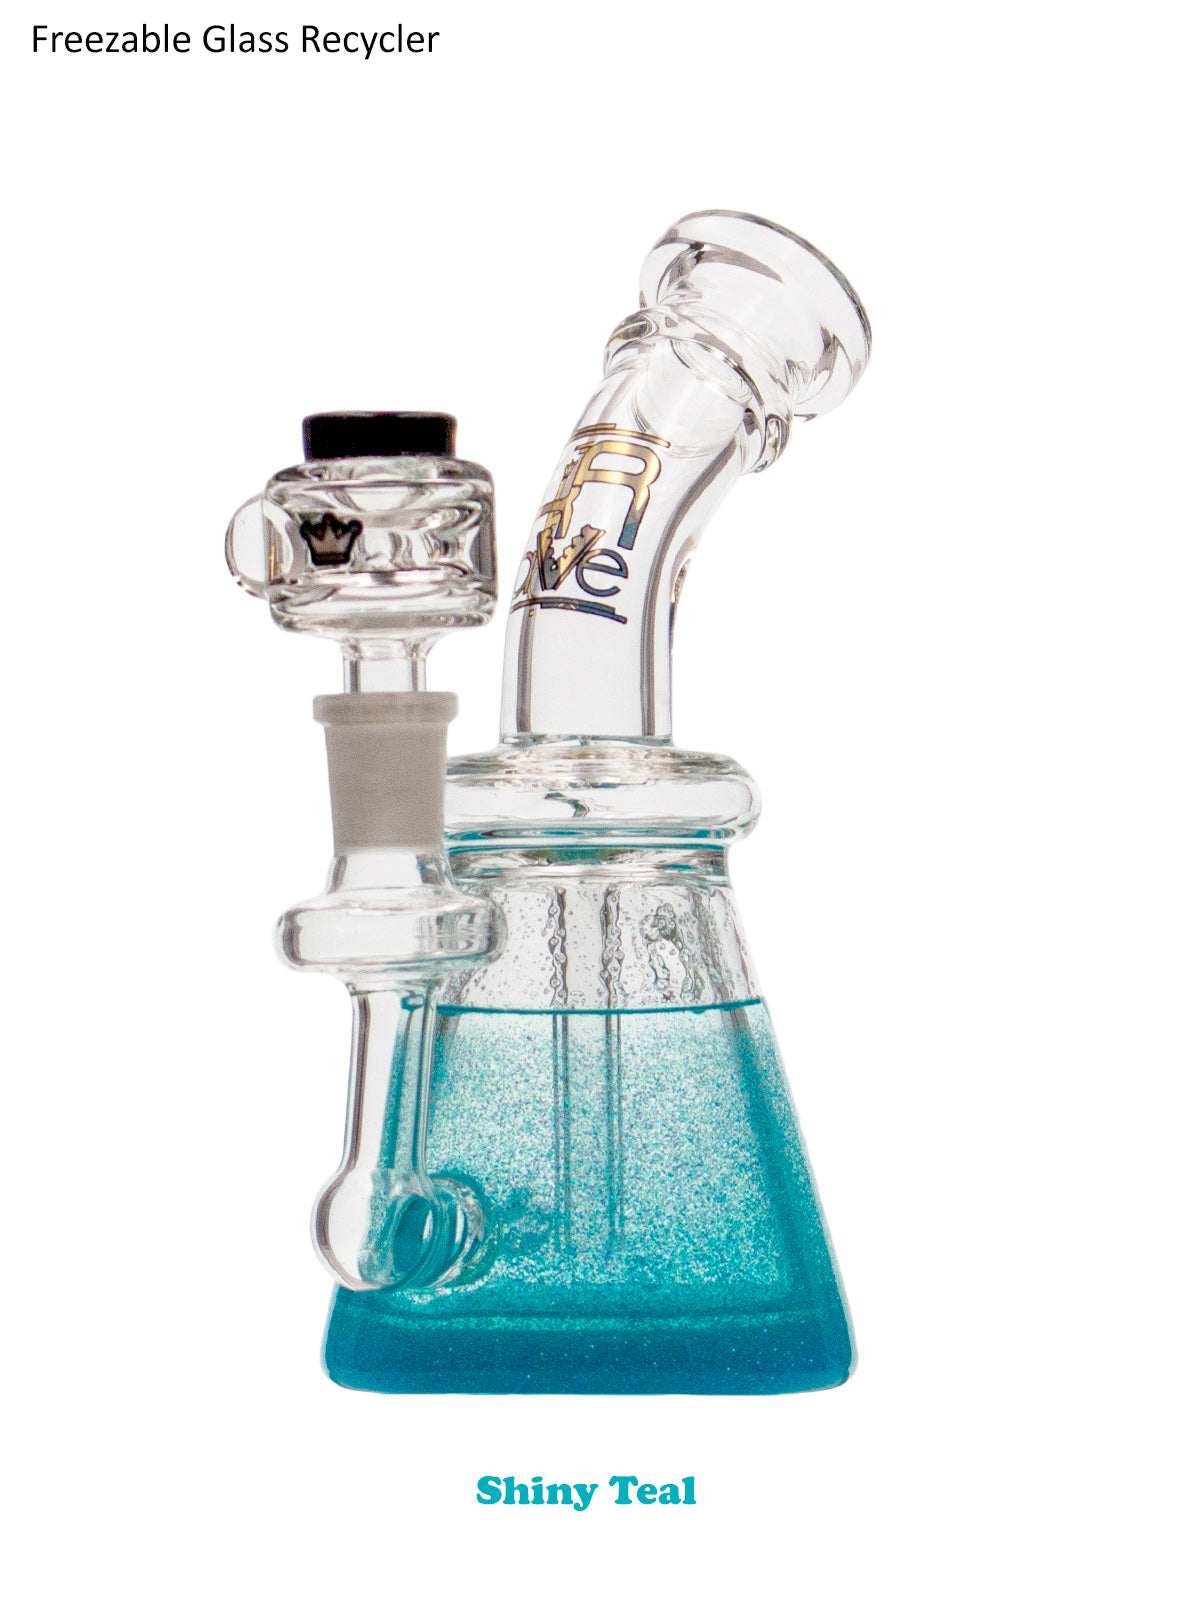 Krave Glass FreezeCYCLER BH * FREE GIFT*